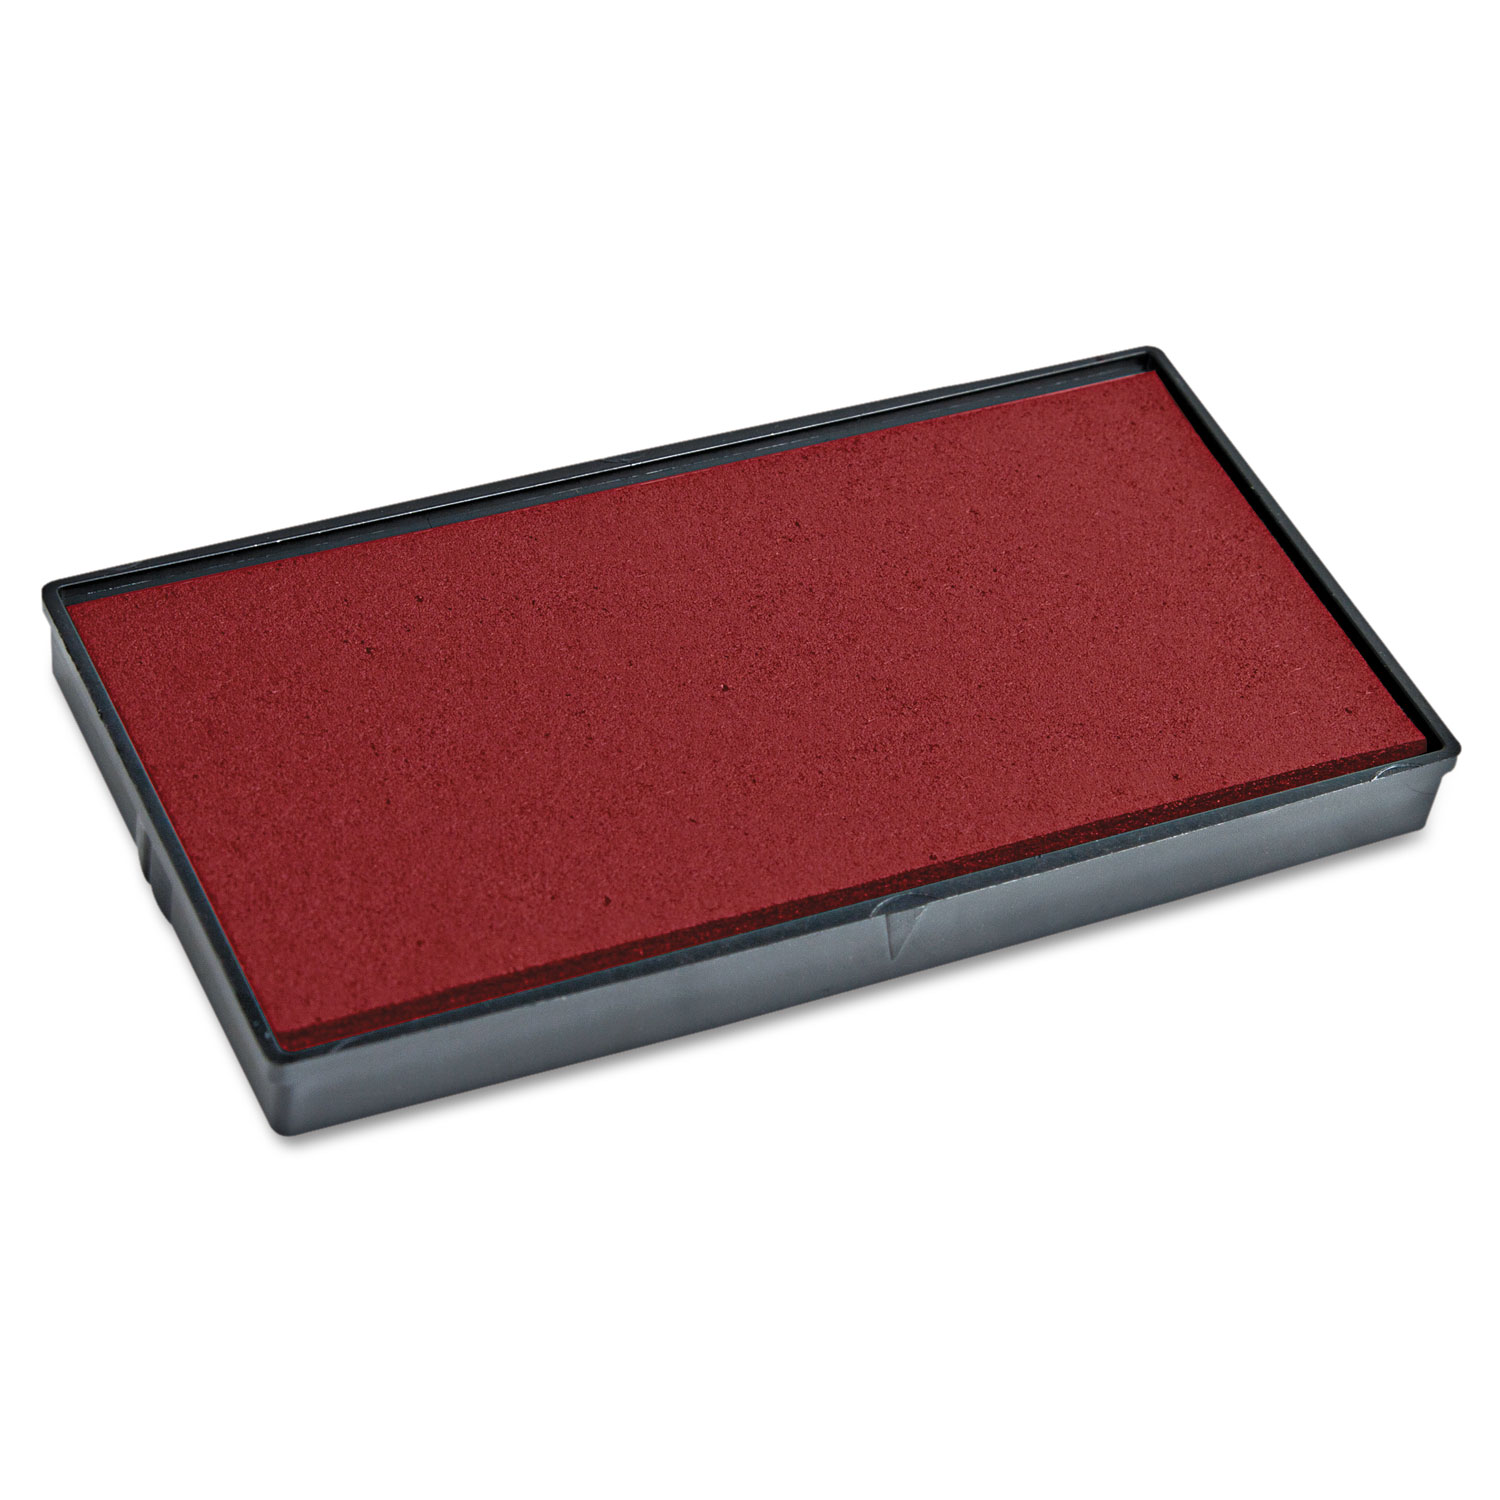  COSCO 2000PLUS 065476 Replacement Ink Pad for 2000PLUS 1SI60P, Red (COS065476) 